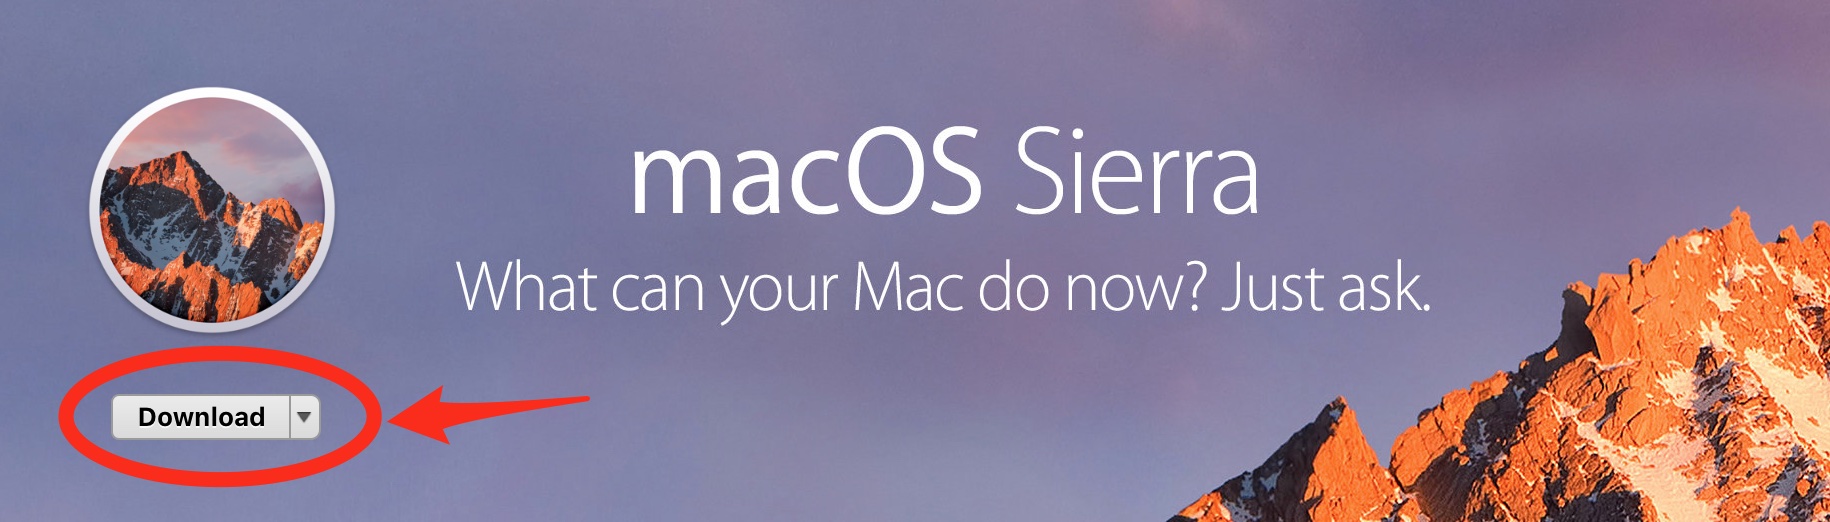 How to make mac os sierra download faster version